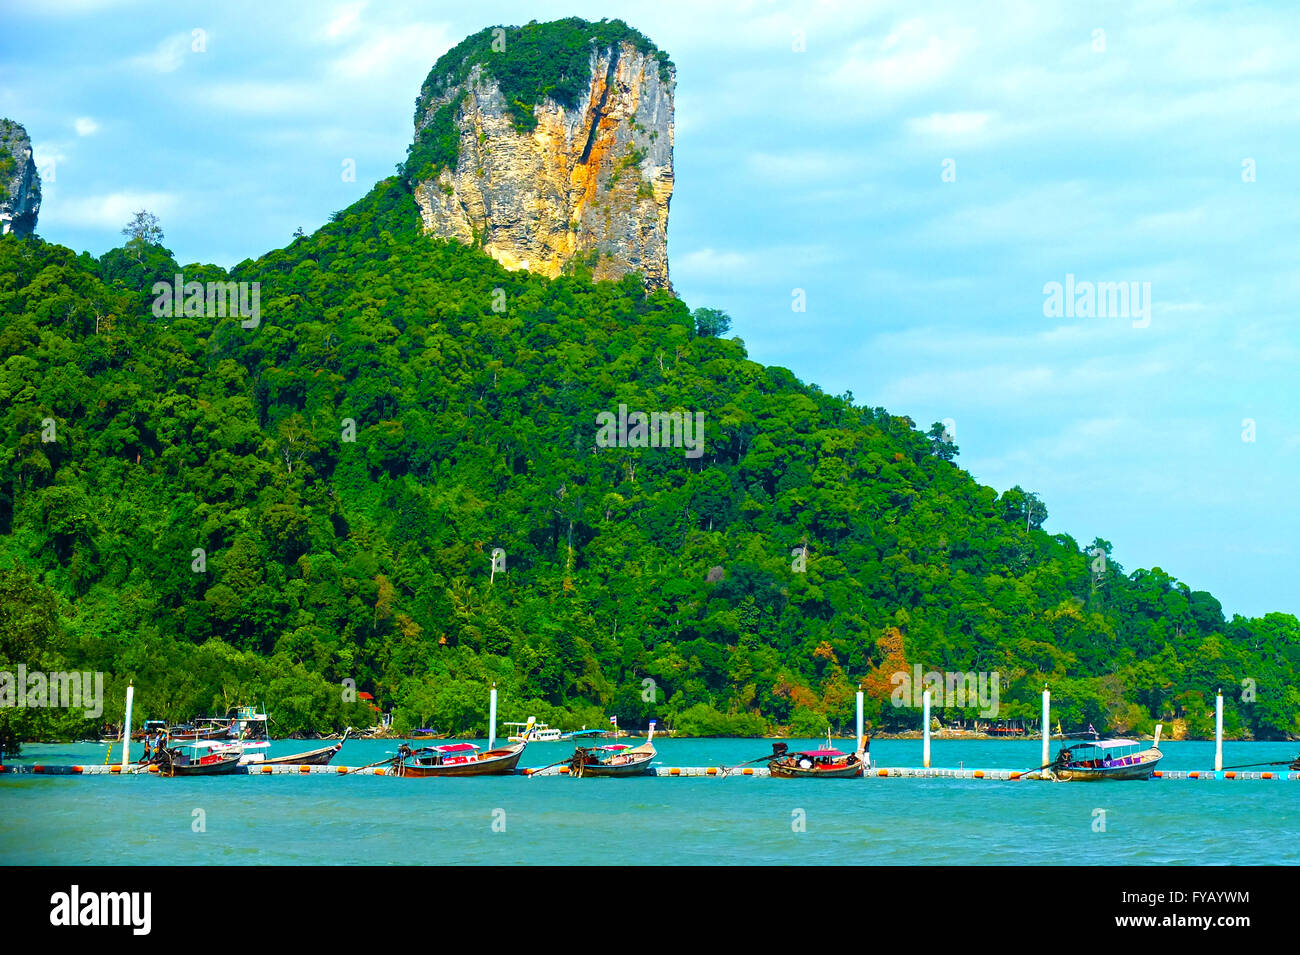 Limestone cliffs with Thai long tail boats anchored along the floating pier Stock Photo